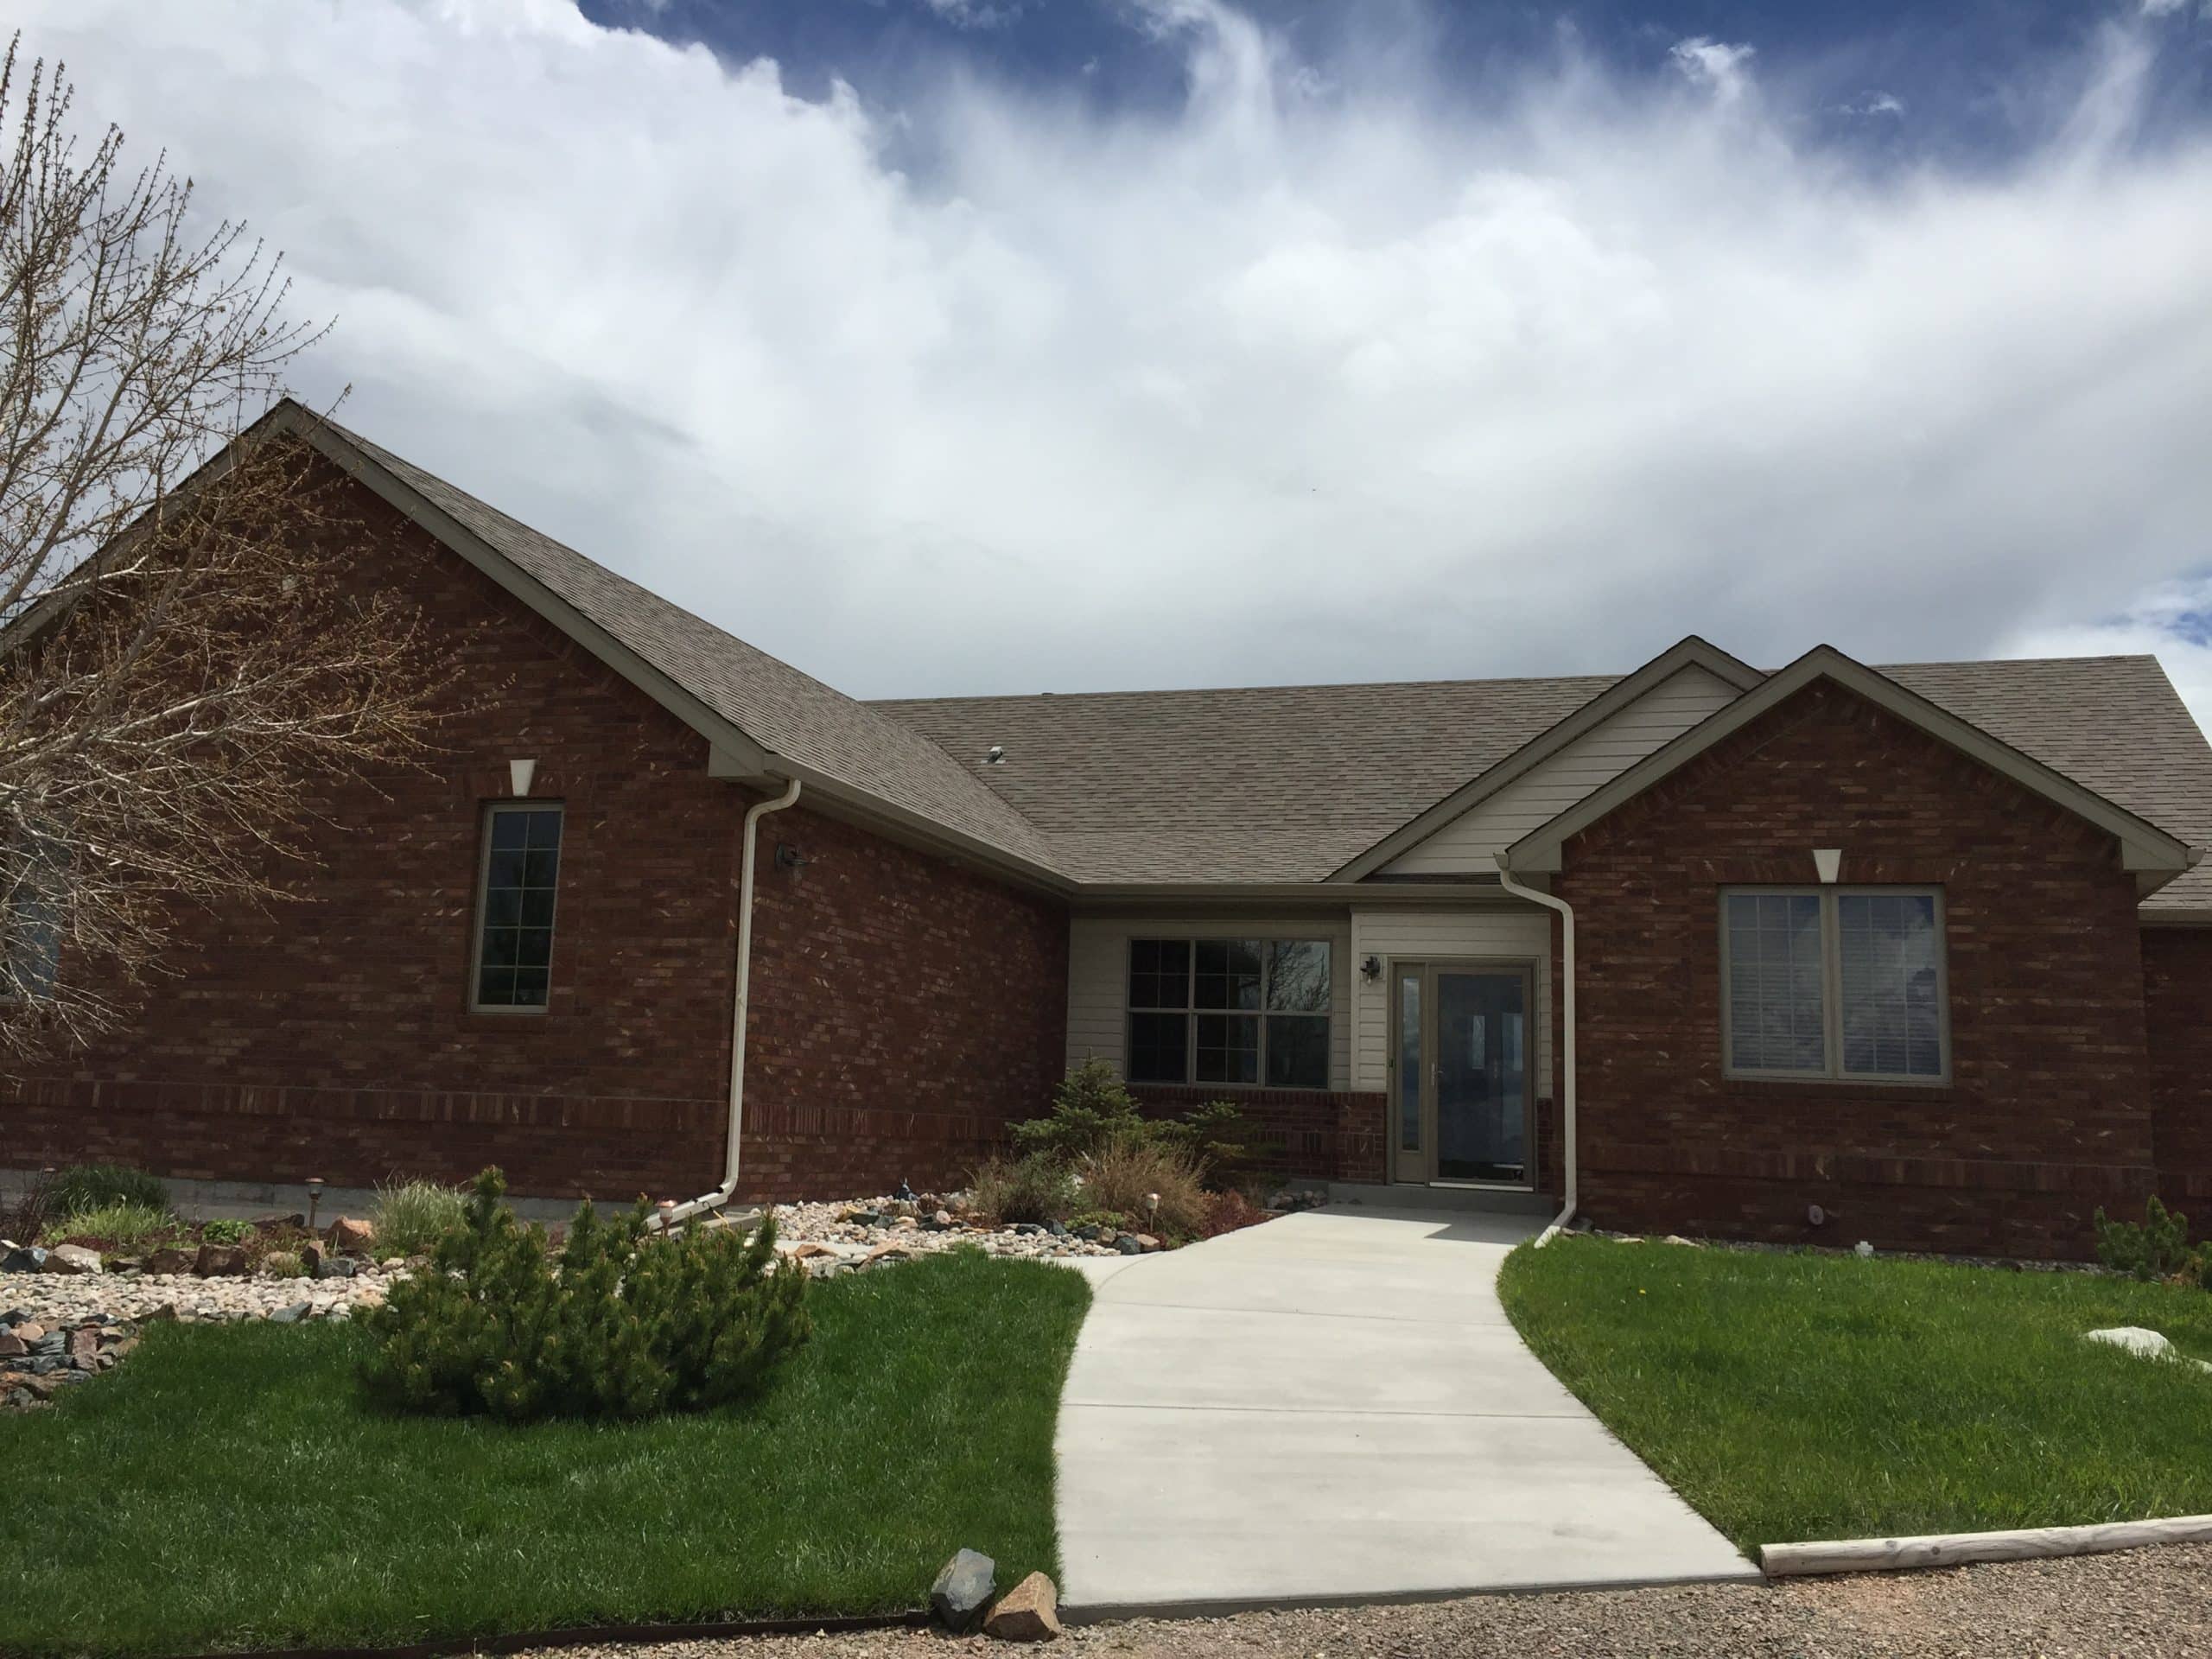 Roof Replacement in Loveland, Colorado Due to Hail